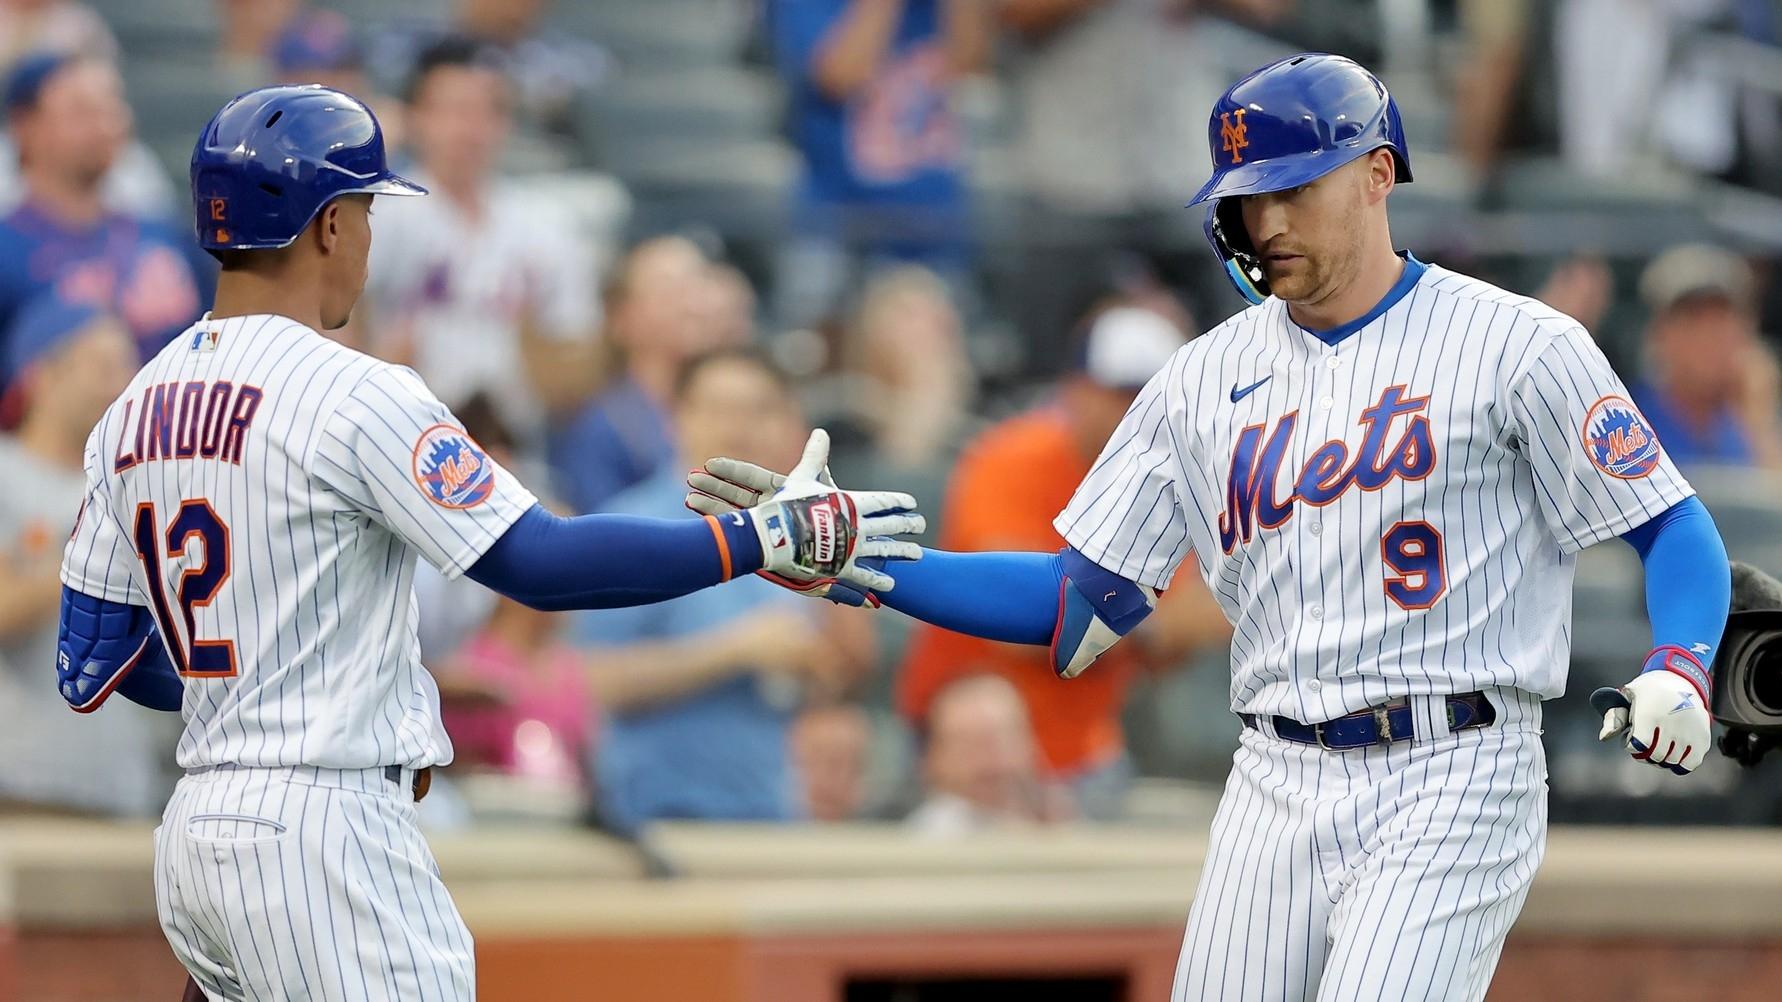 New York Mets left fielder Brandon Nimmo (9) celebrates his solo home run against the Pittsburgh Pirates with shortstop Francisco Lindor (12) during the first inning. / Brad Penner-USA TODAY Sports